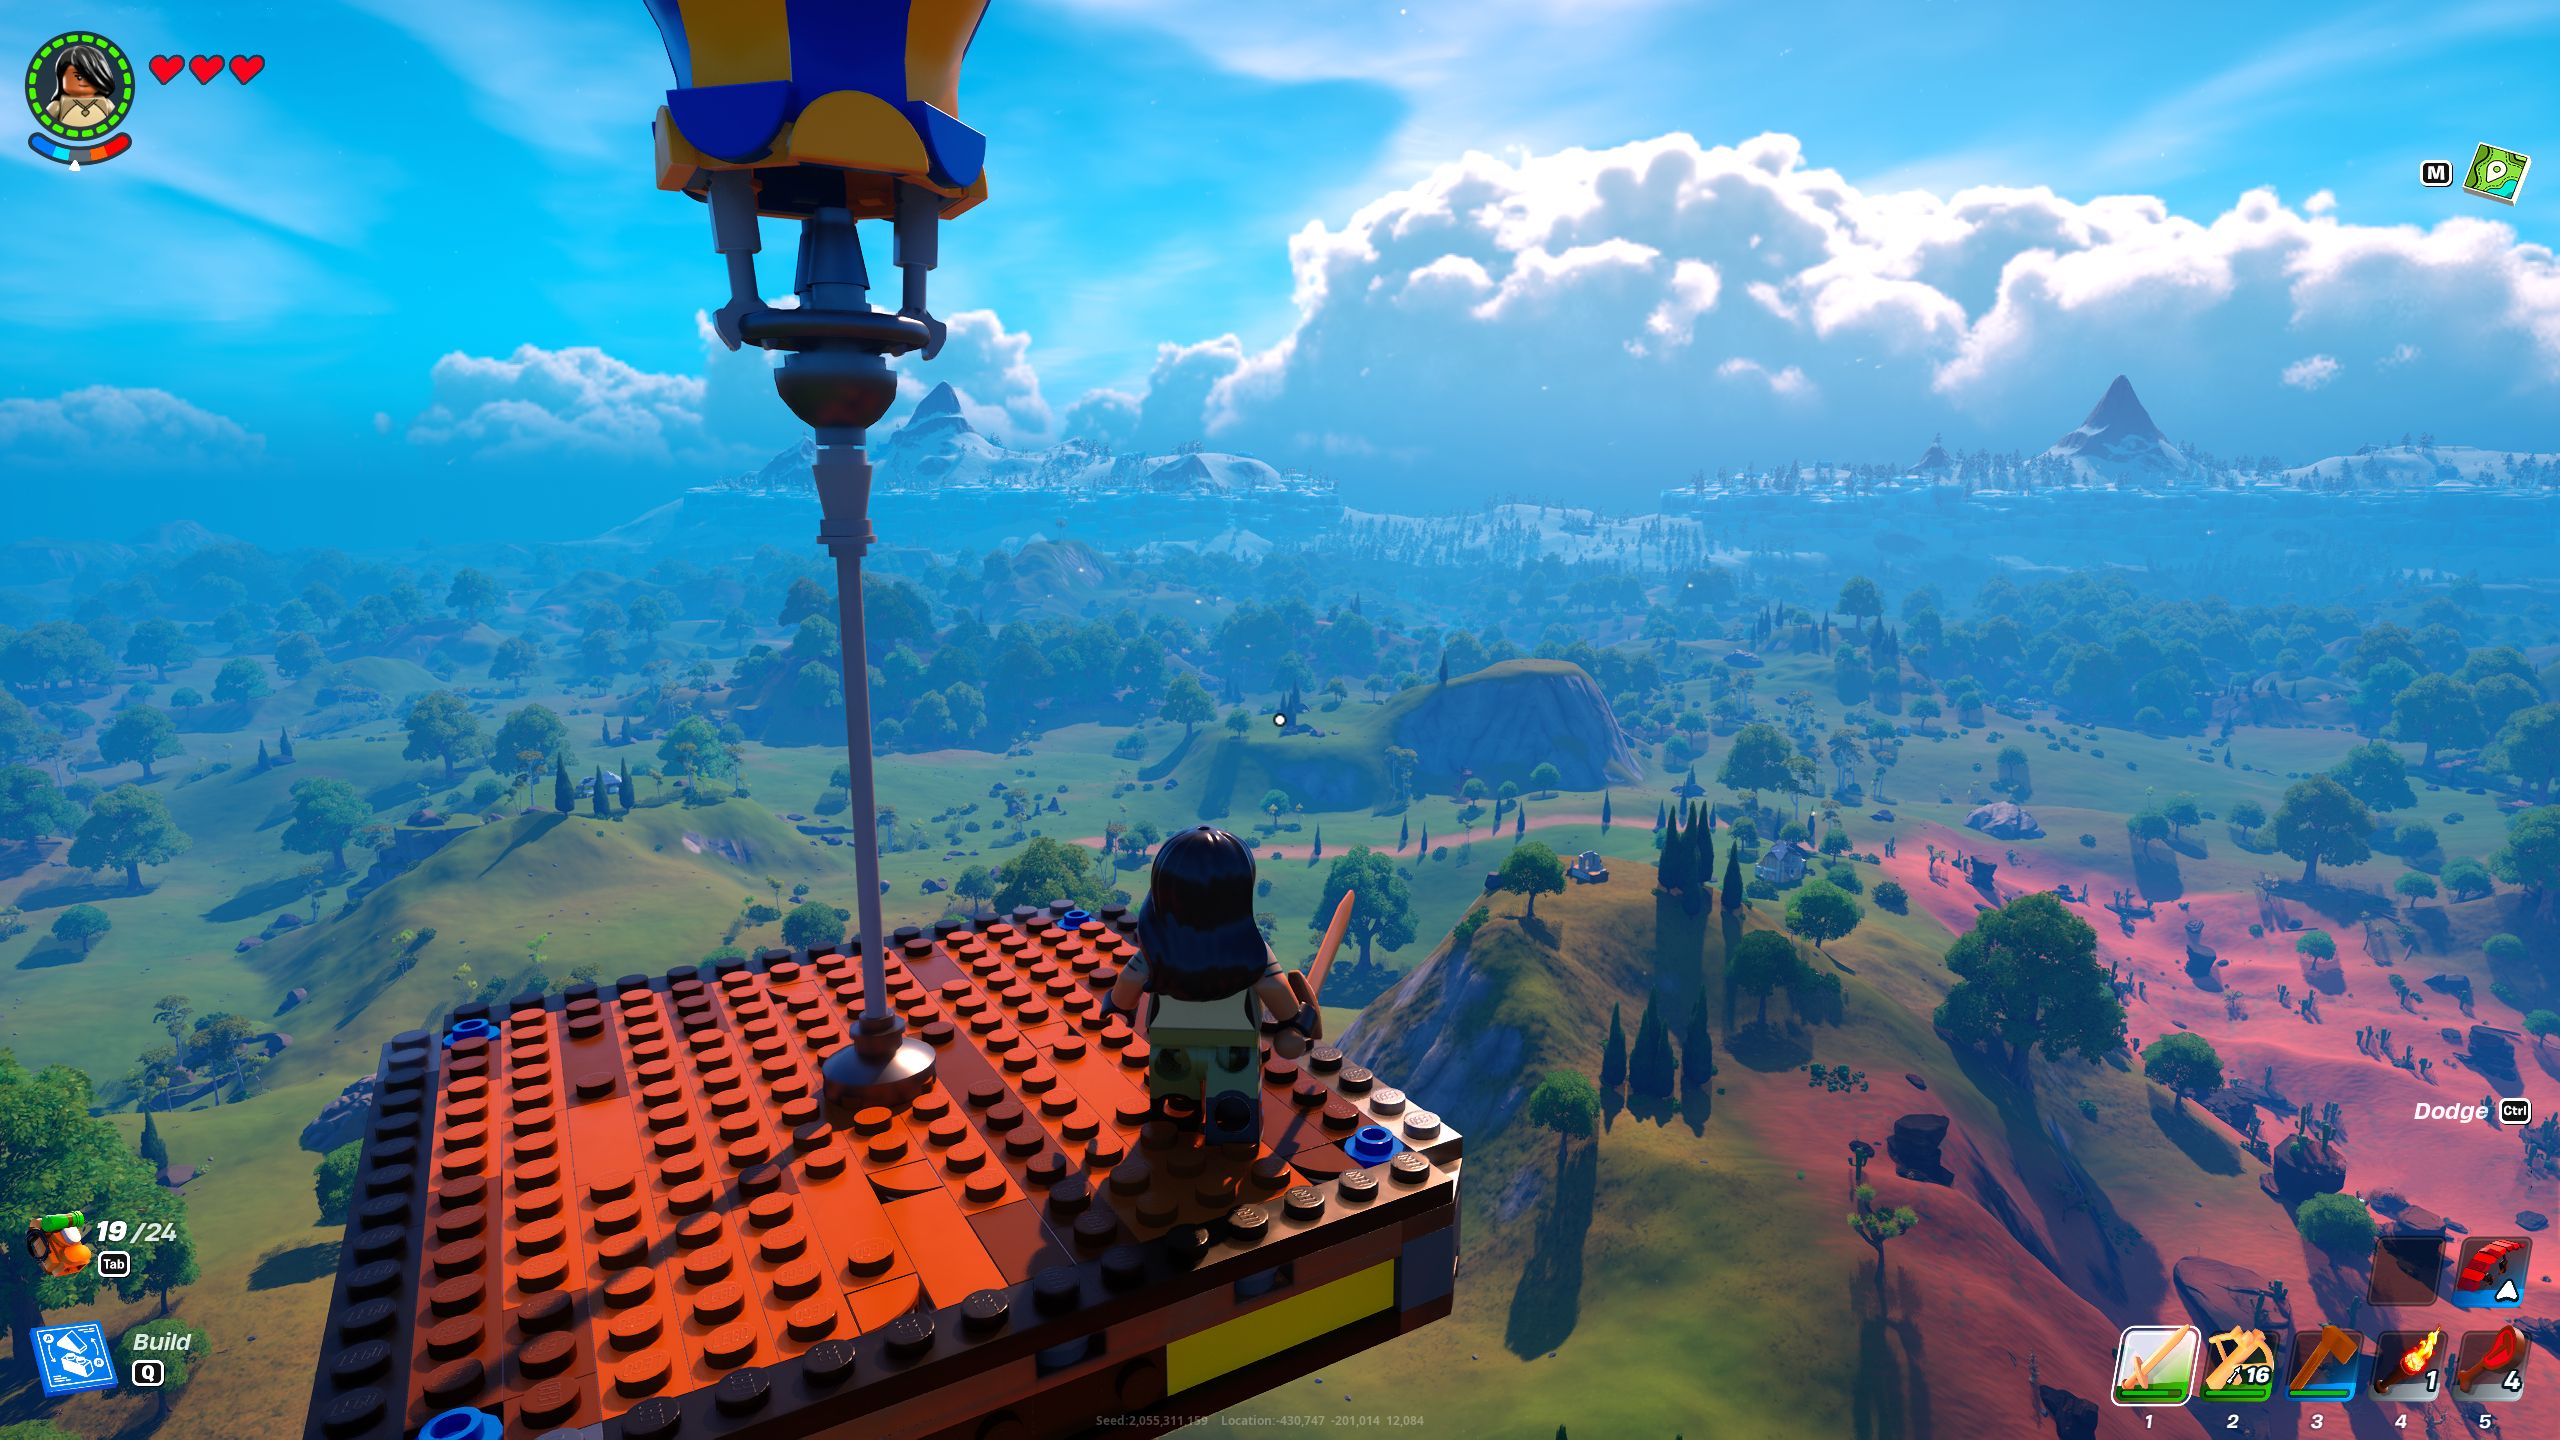 LEGO Fortnite Minifigure Standing On Platform Held Up By Large Blue Balloon Admiring Grassy Hills And Snowy Mountain Ranges